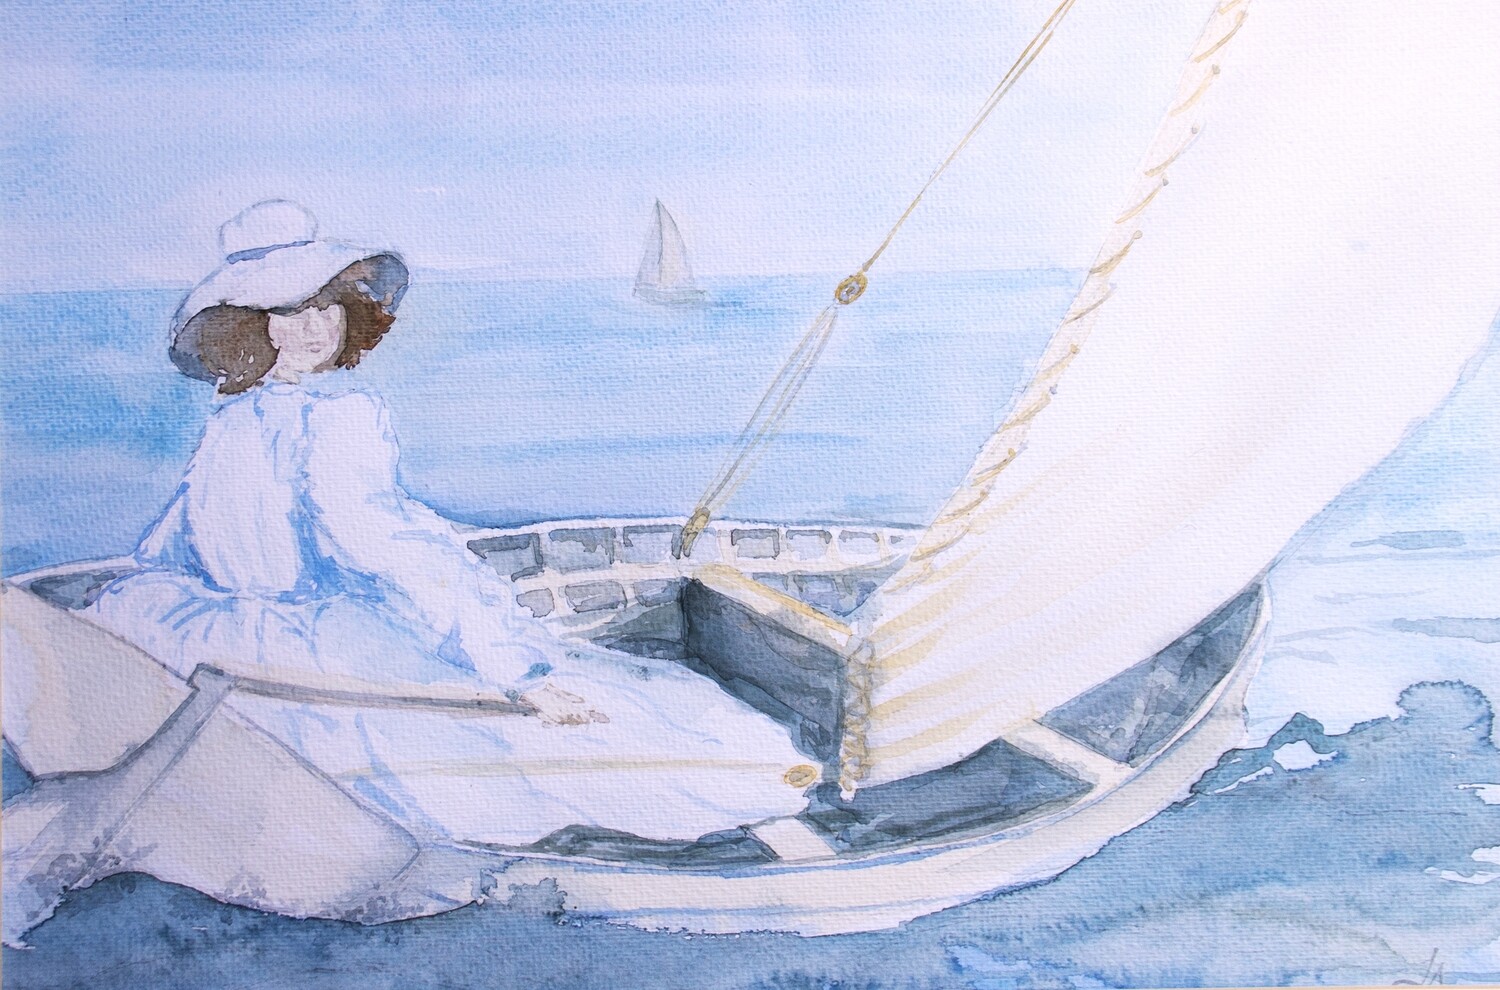 Lady Yachts Woman - Water Colour - Digital Image